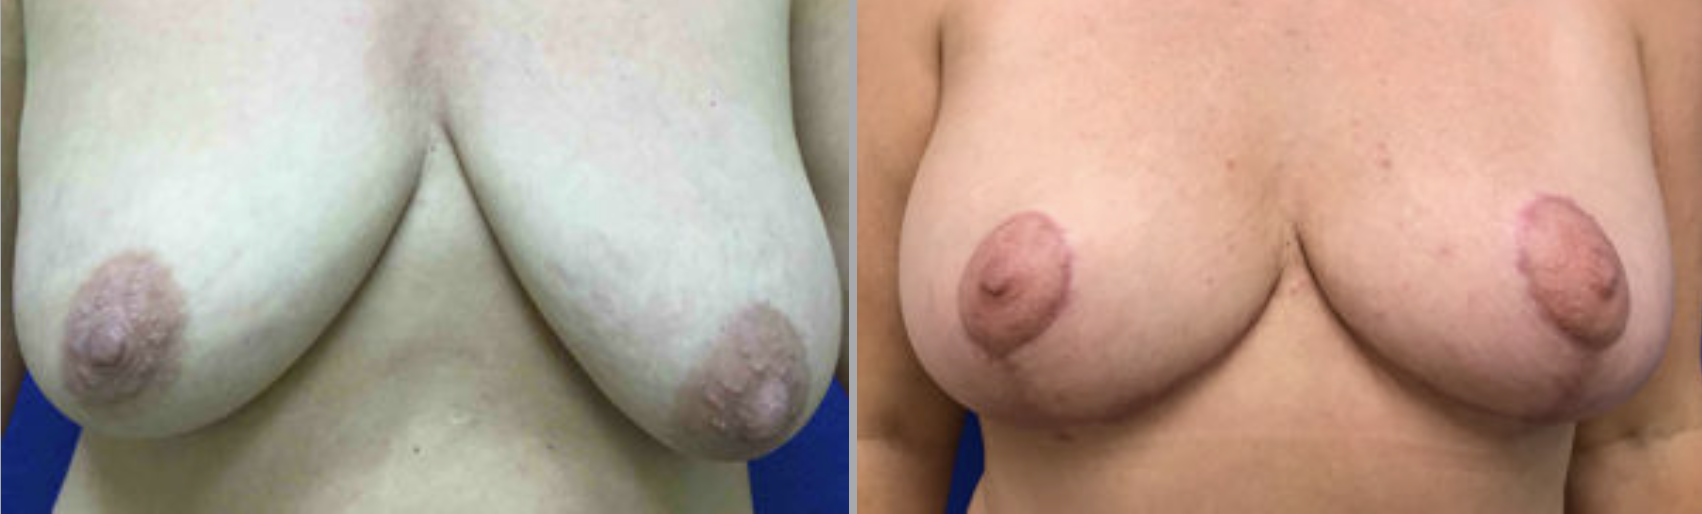 Breast Lift Before and After Pictures in Bucks County, PA and Hunterdon County, NJ